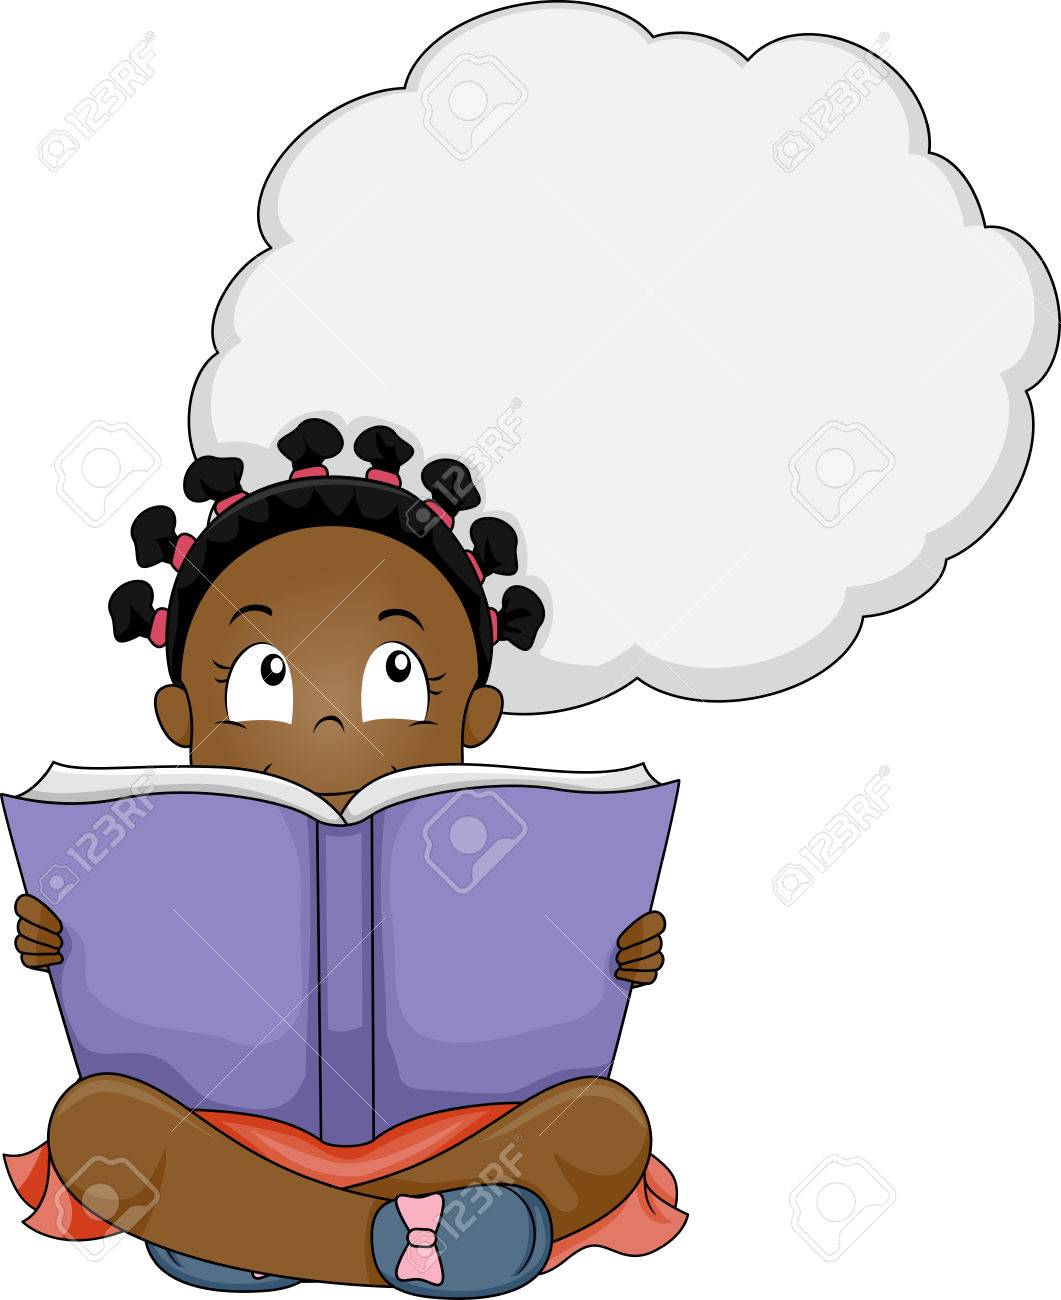 Thinking While Reading Clipart.